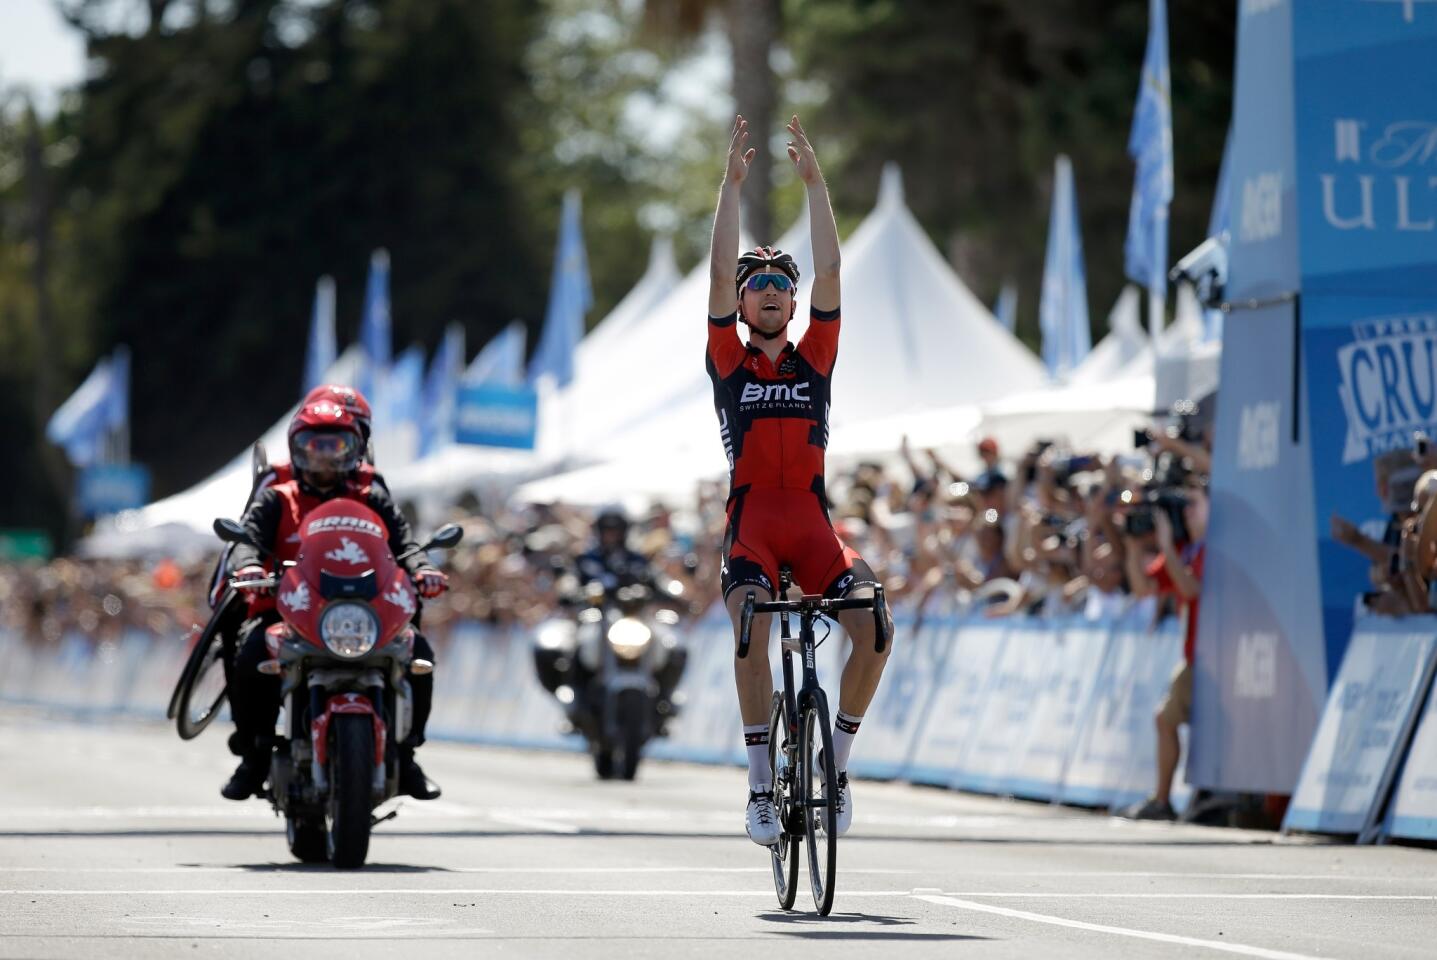 U.S. cyclist Taylor Phinney of the BMC Racing Team celebrates winning Stage 5 of the 2014 Amgen Tour of California on Thursday.